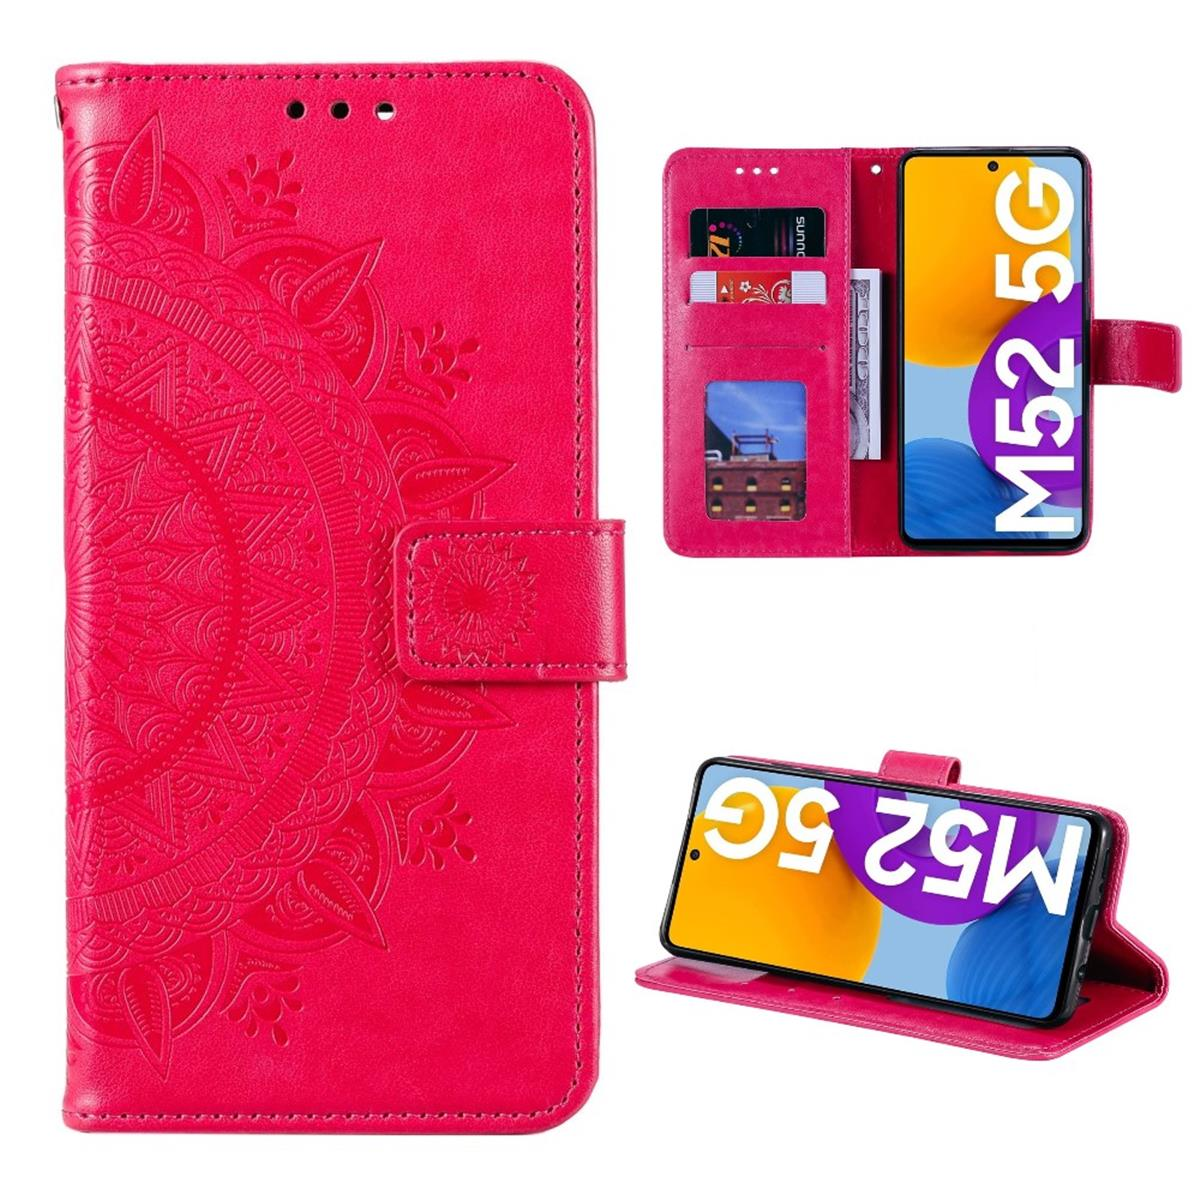 COVERKINGZ Klapphülle mit Mandala M52 Samsung, 5G, Muster, Pink Bookcover, Galaxy